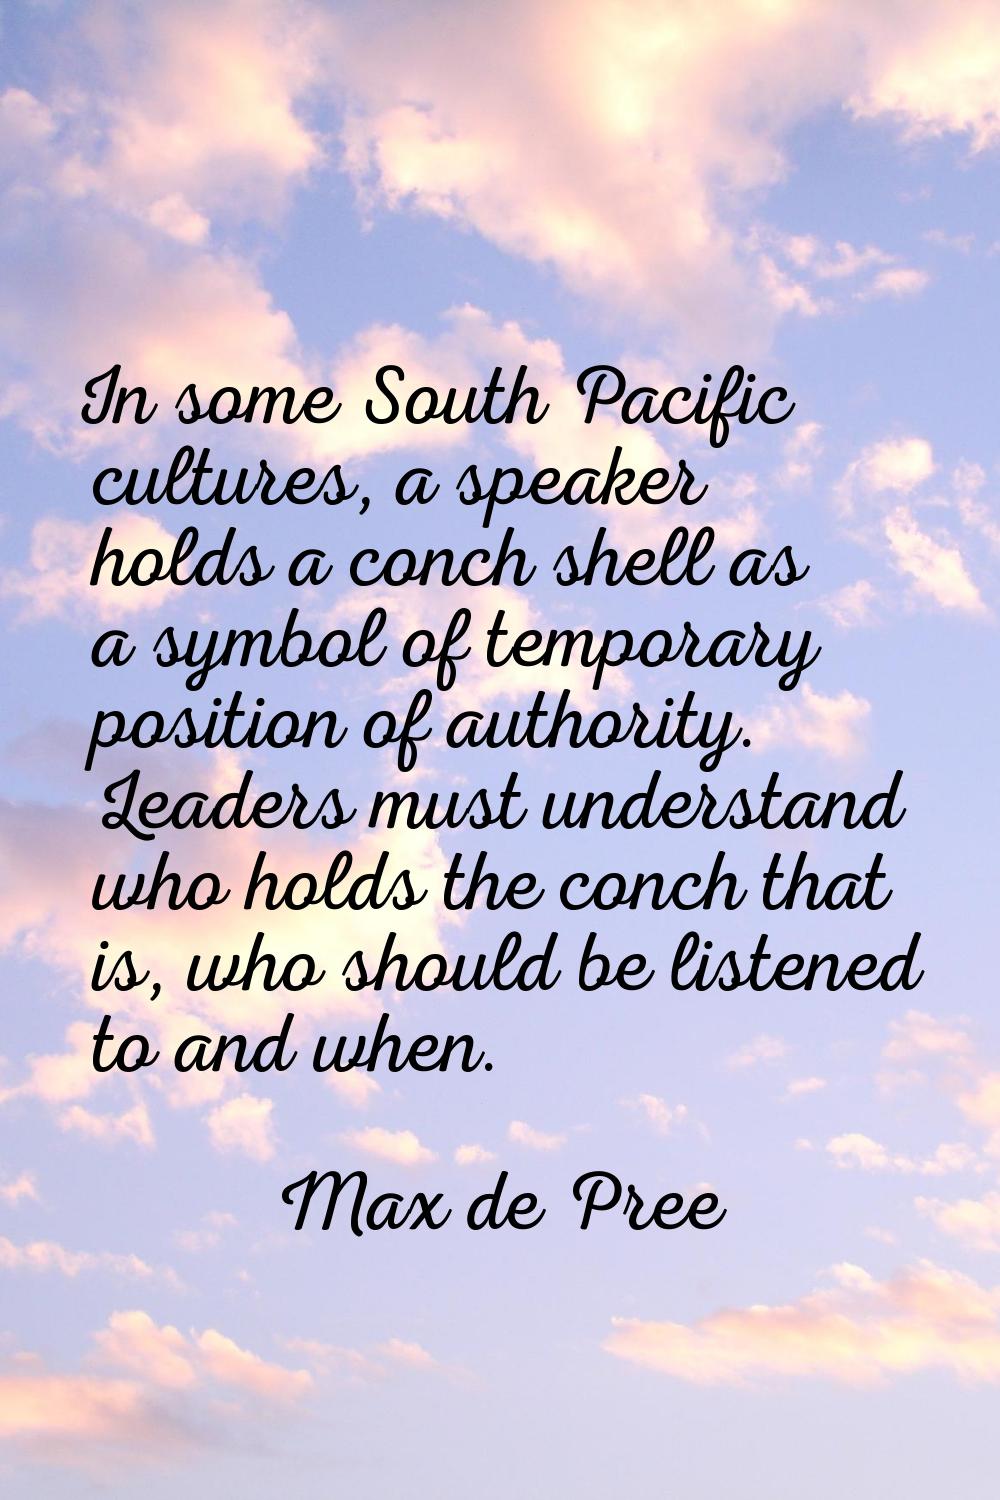 In some South Pacific cultures, a speaker holds a conch shell as a symbol of temporary position of 